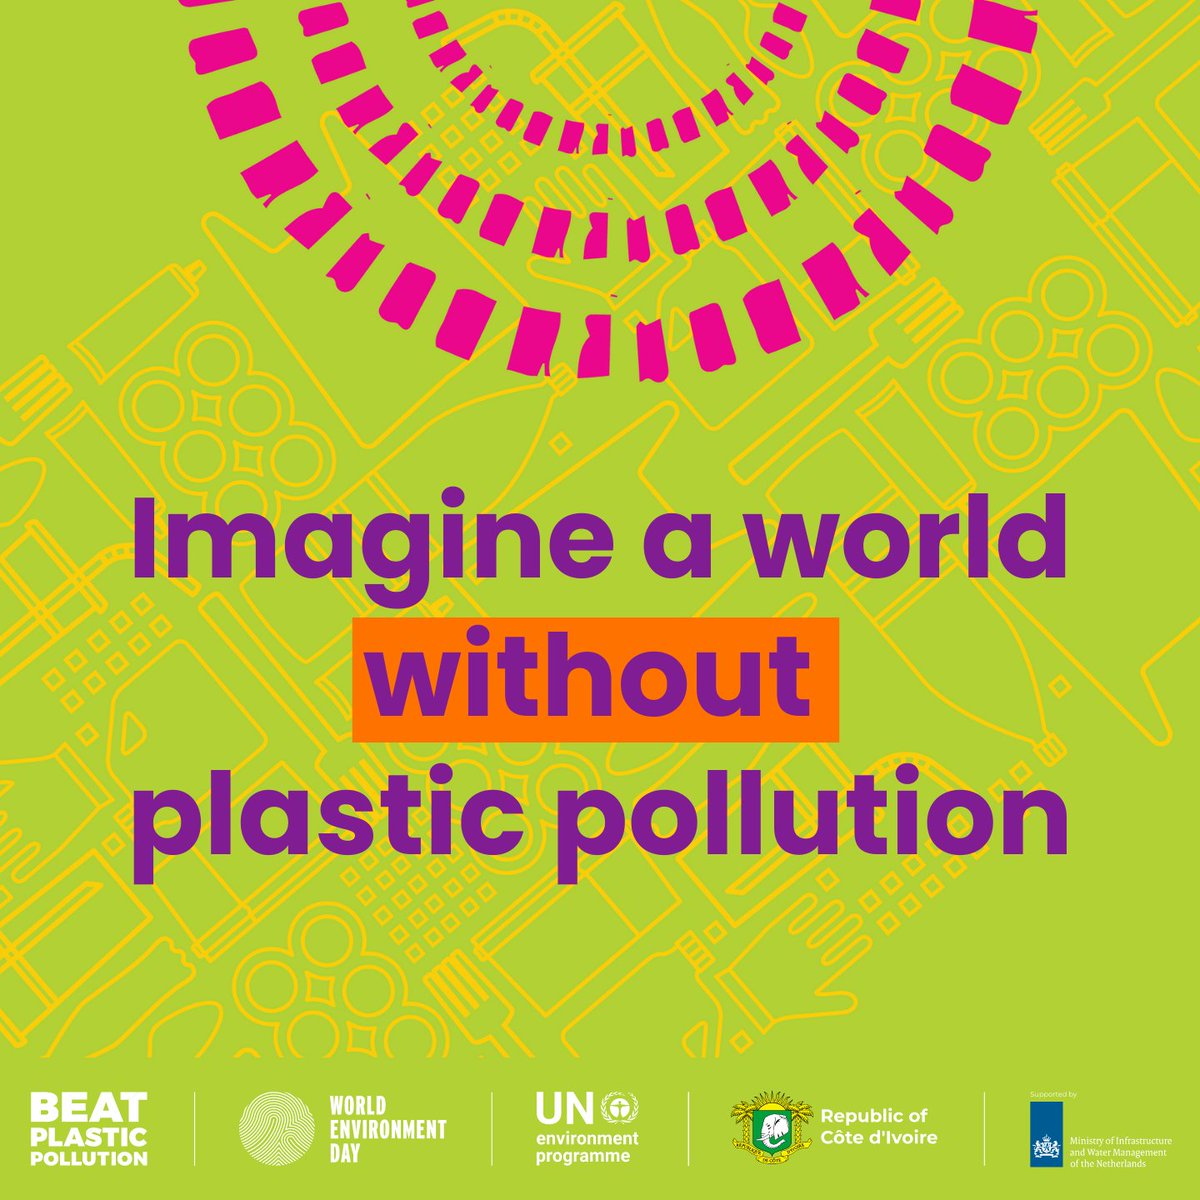 📢Use your choice: Buy things that don’t end up in our ocean. 

Use your voice: Engage with your representatives & demand action. There’s more than one way to #BeatPlasticPollution. 

See how you can be part of the solution this #WorldEnvironmentDay: bit.ly/PlasticSolutio…